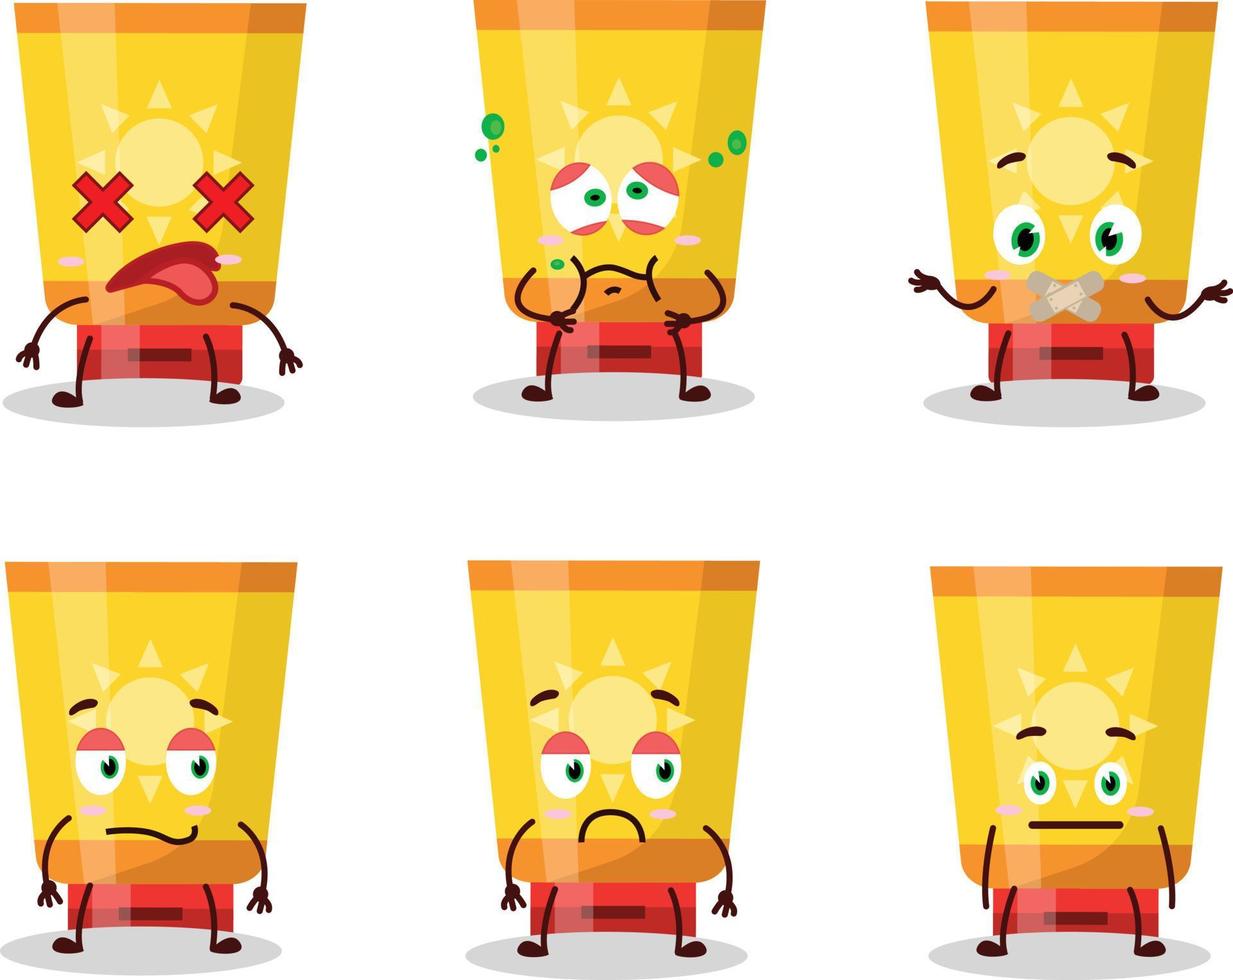 Sun block cartoon character with nope expression vector